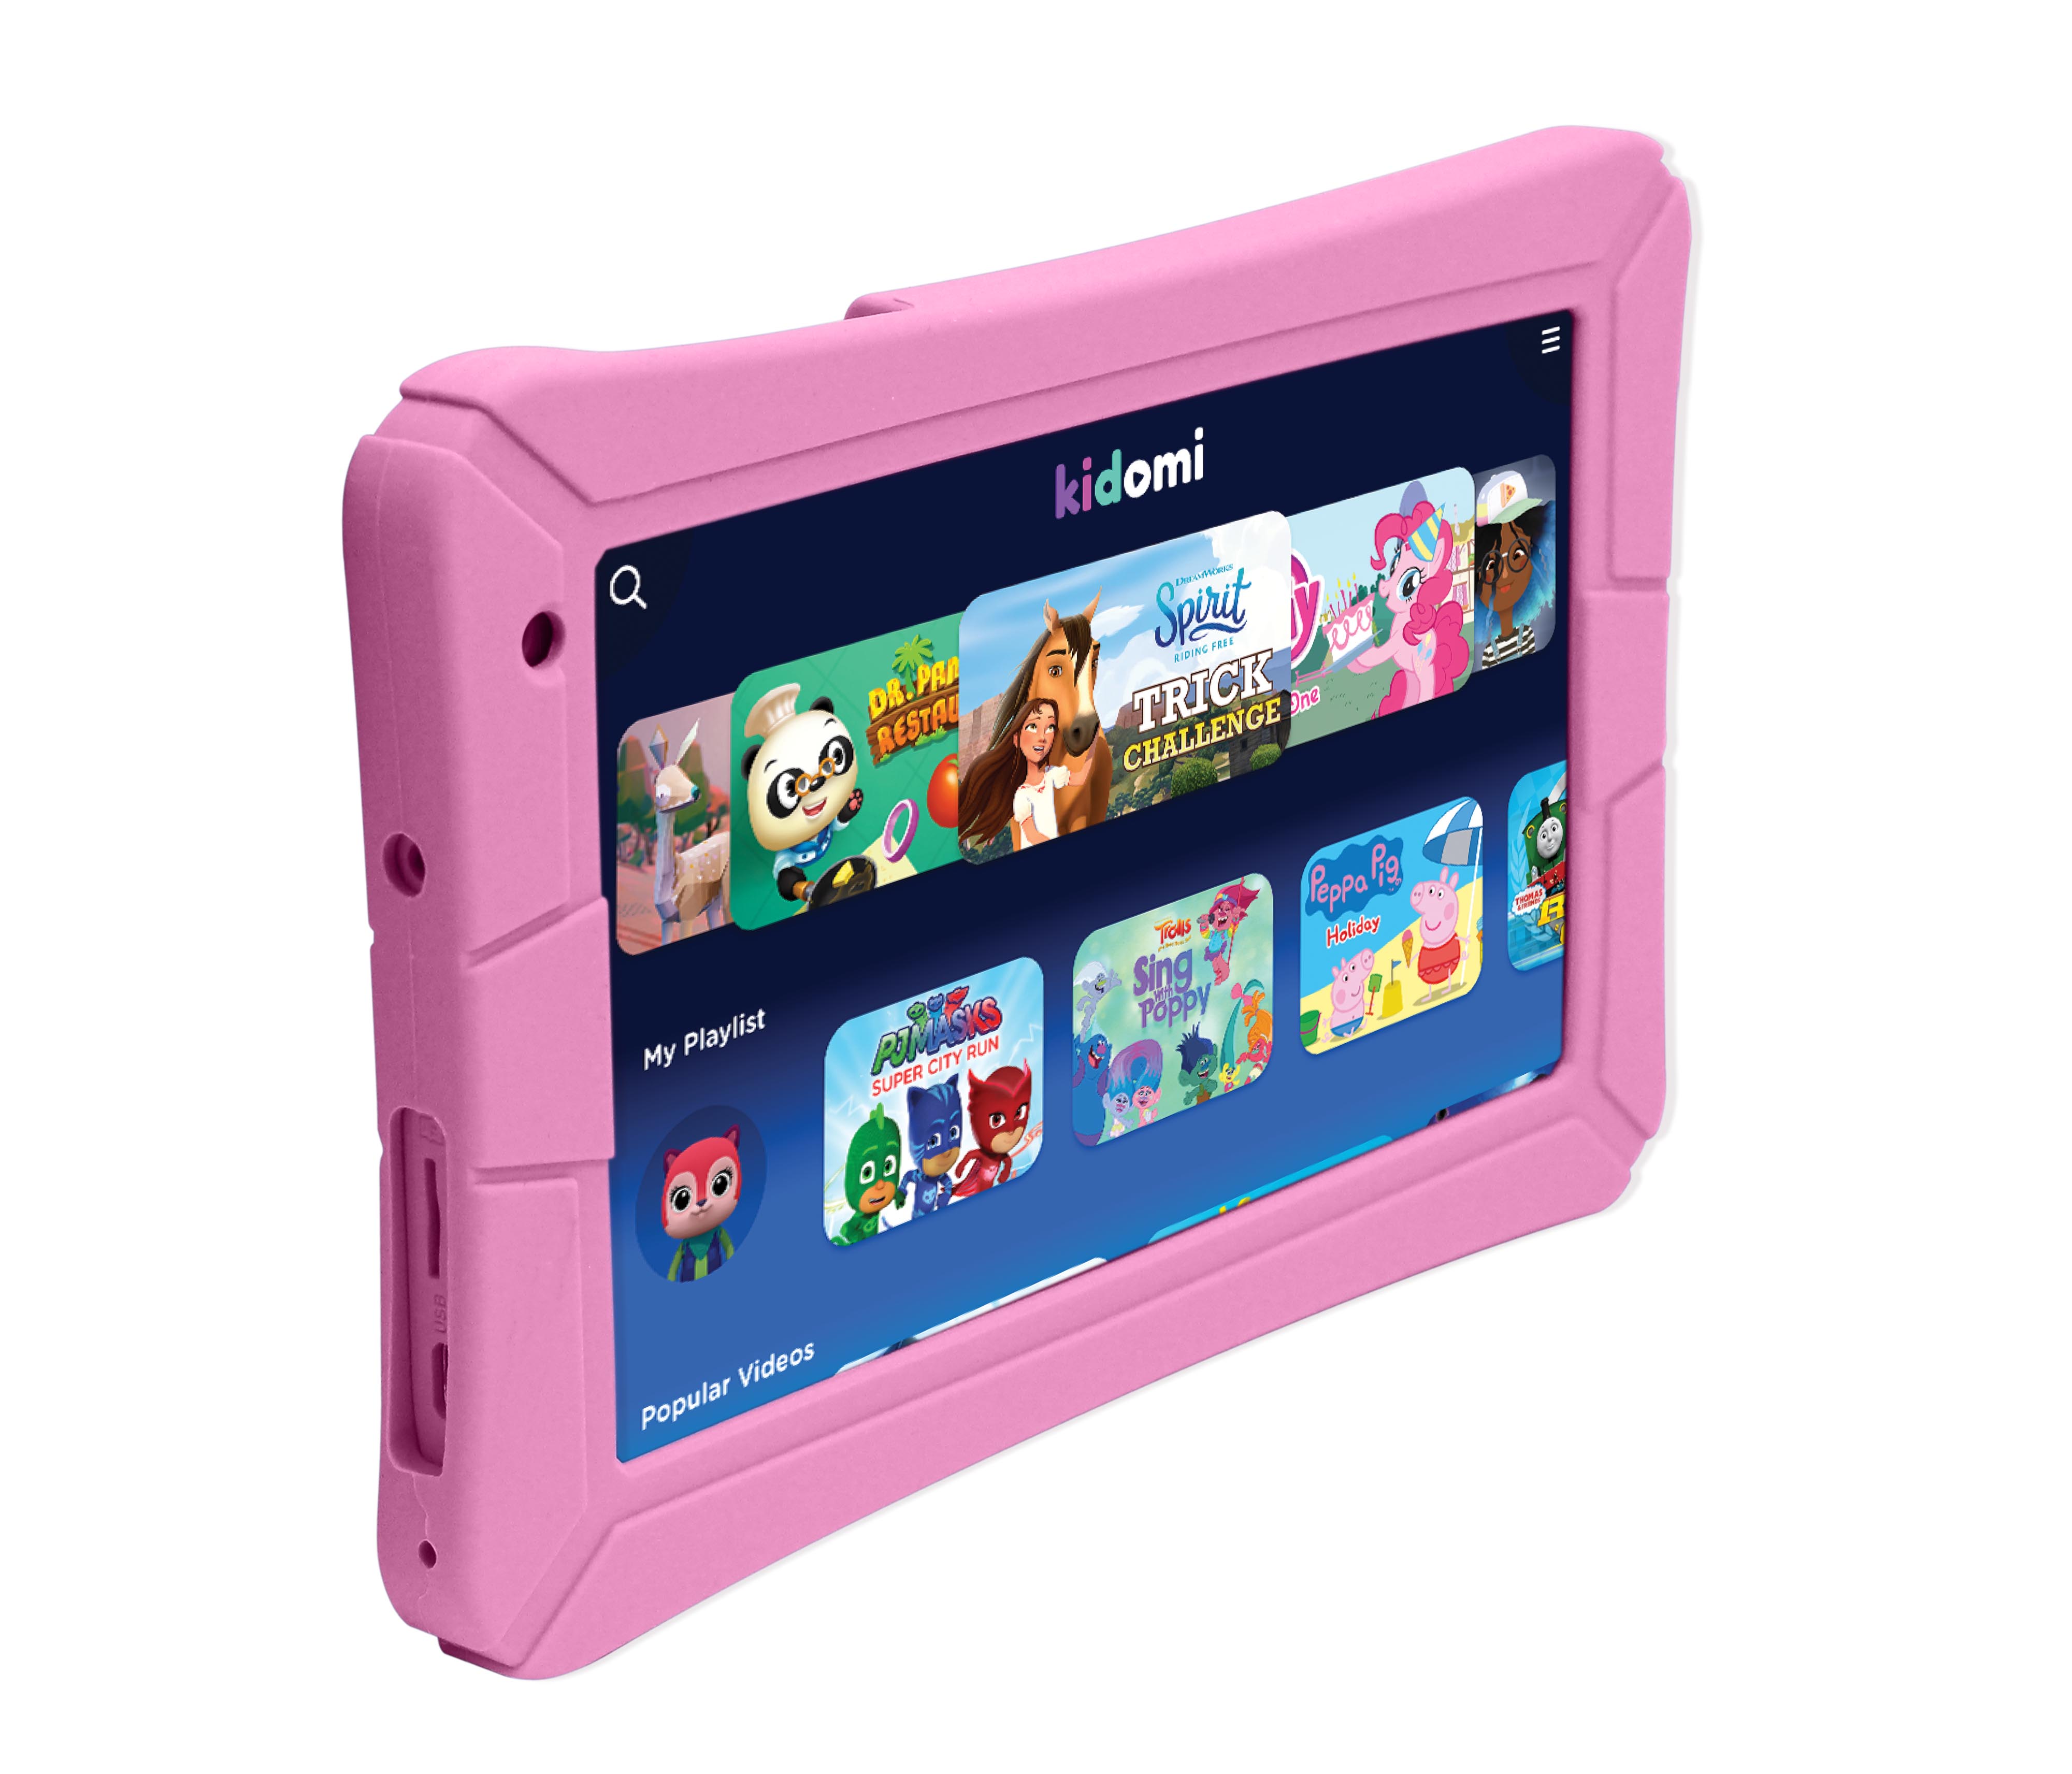 HighQ 7" Learning Tab Jr. featuring Kidomi, Gel Case Included, Quad Core Processor, 8GB Storage, Android 8.1 Go Edition, Dual Cameras, Kidomi Free Trial Included, Pink - image 3 of 6